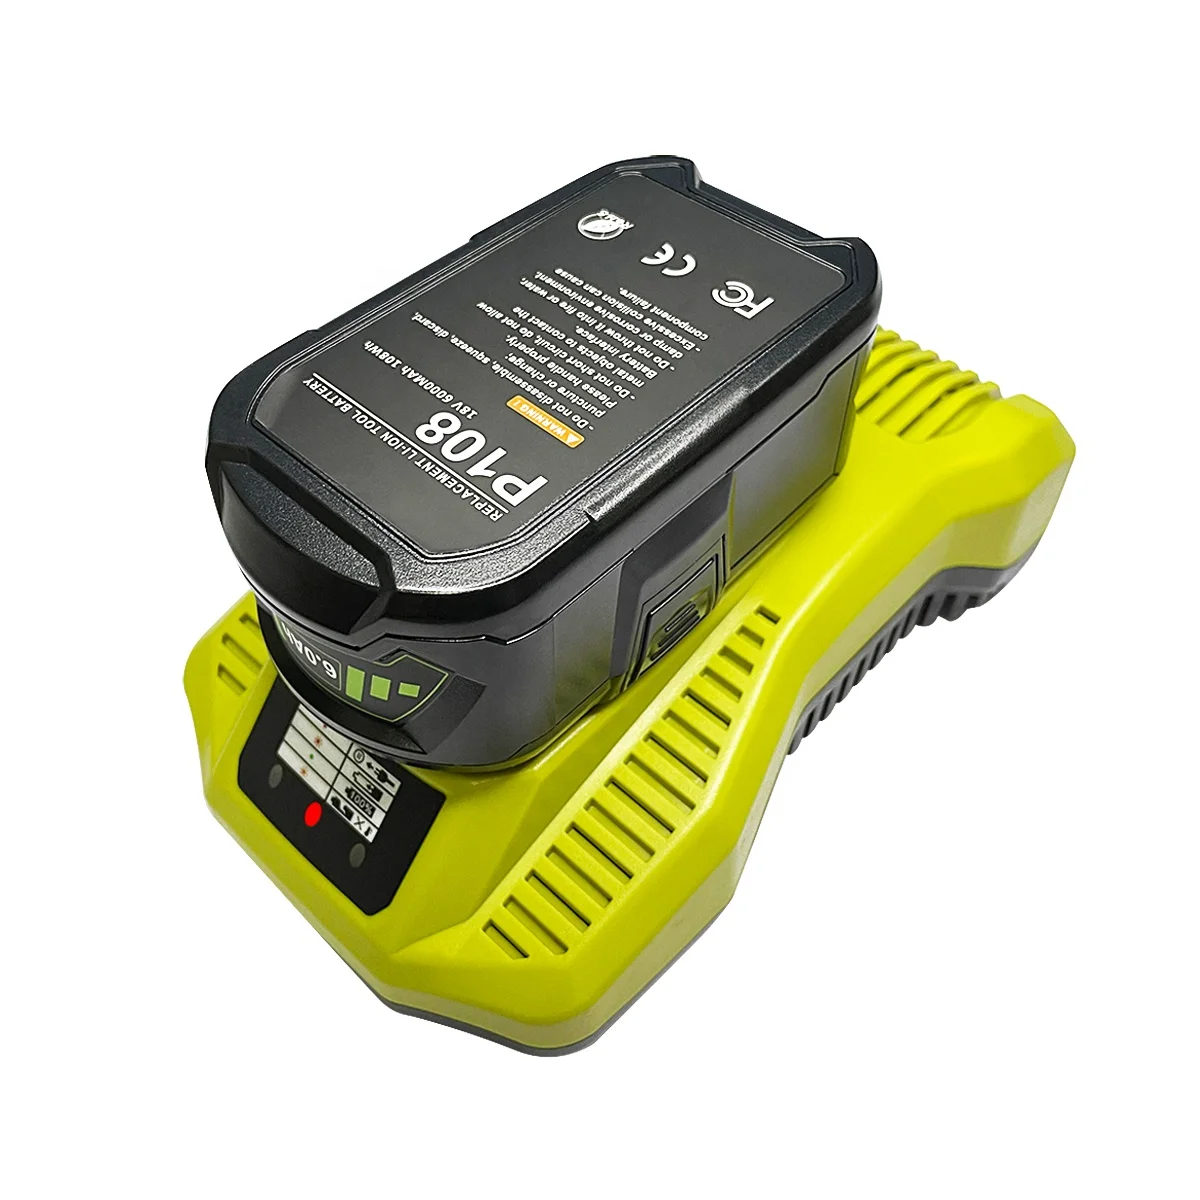 

P117 For Ryobi 18V Battery Charger Compatible with Ryobi 12V 18V 3A One+ Plus Lithium Battery P103 P105 P107 P108, Green+black